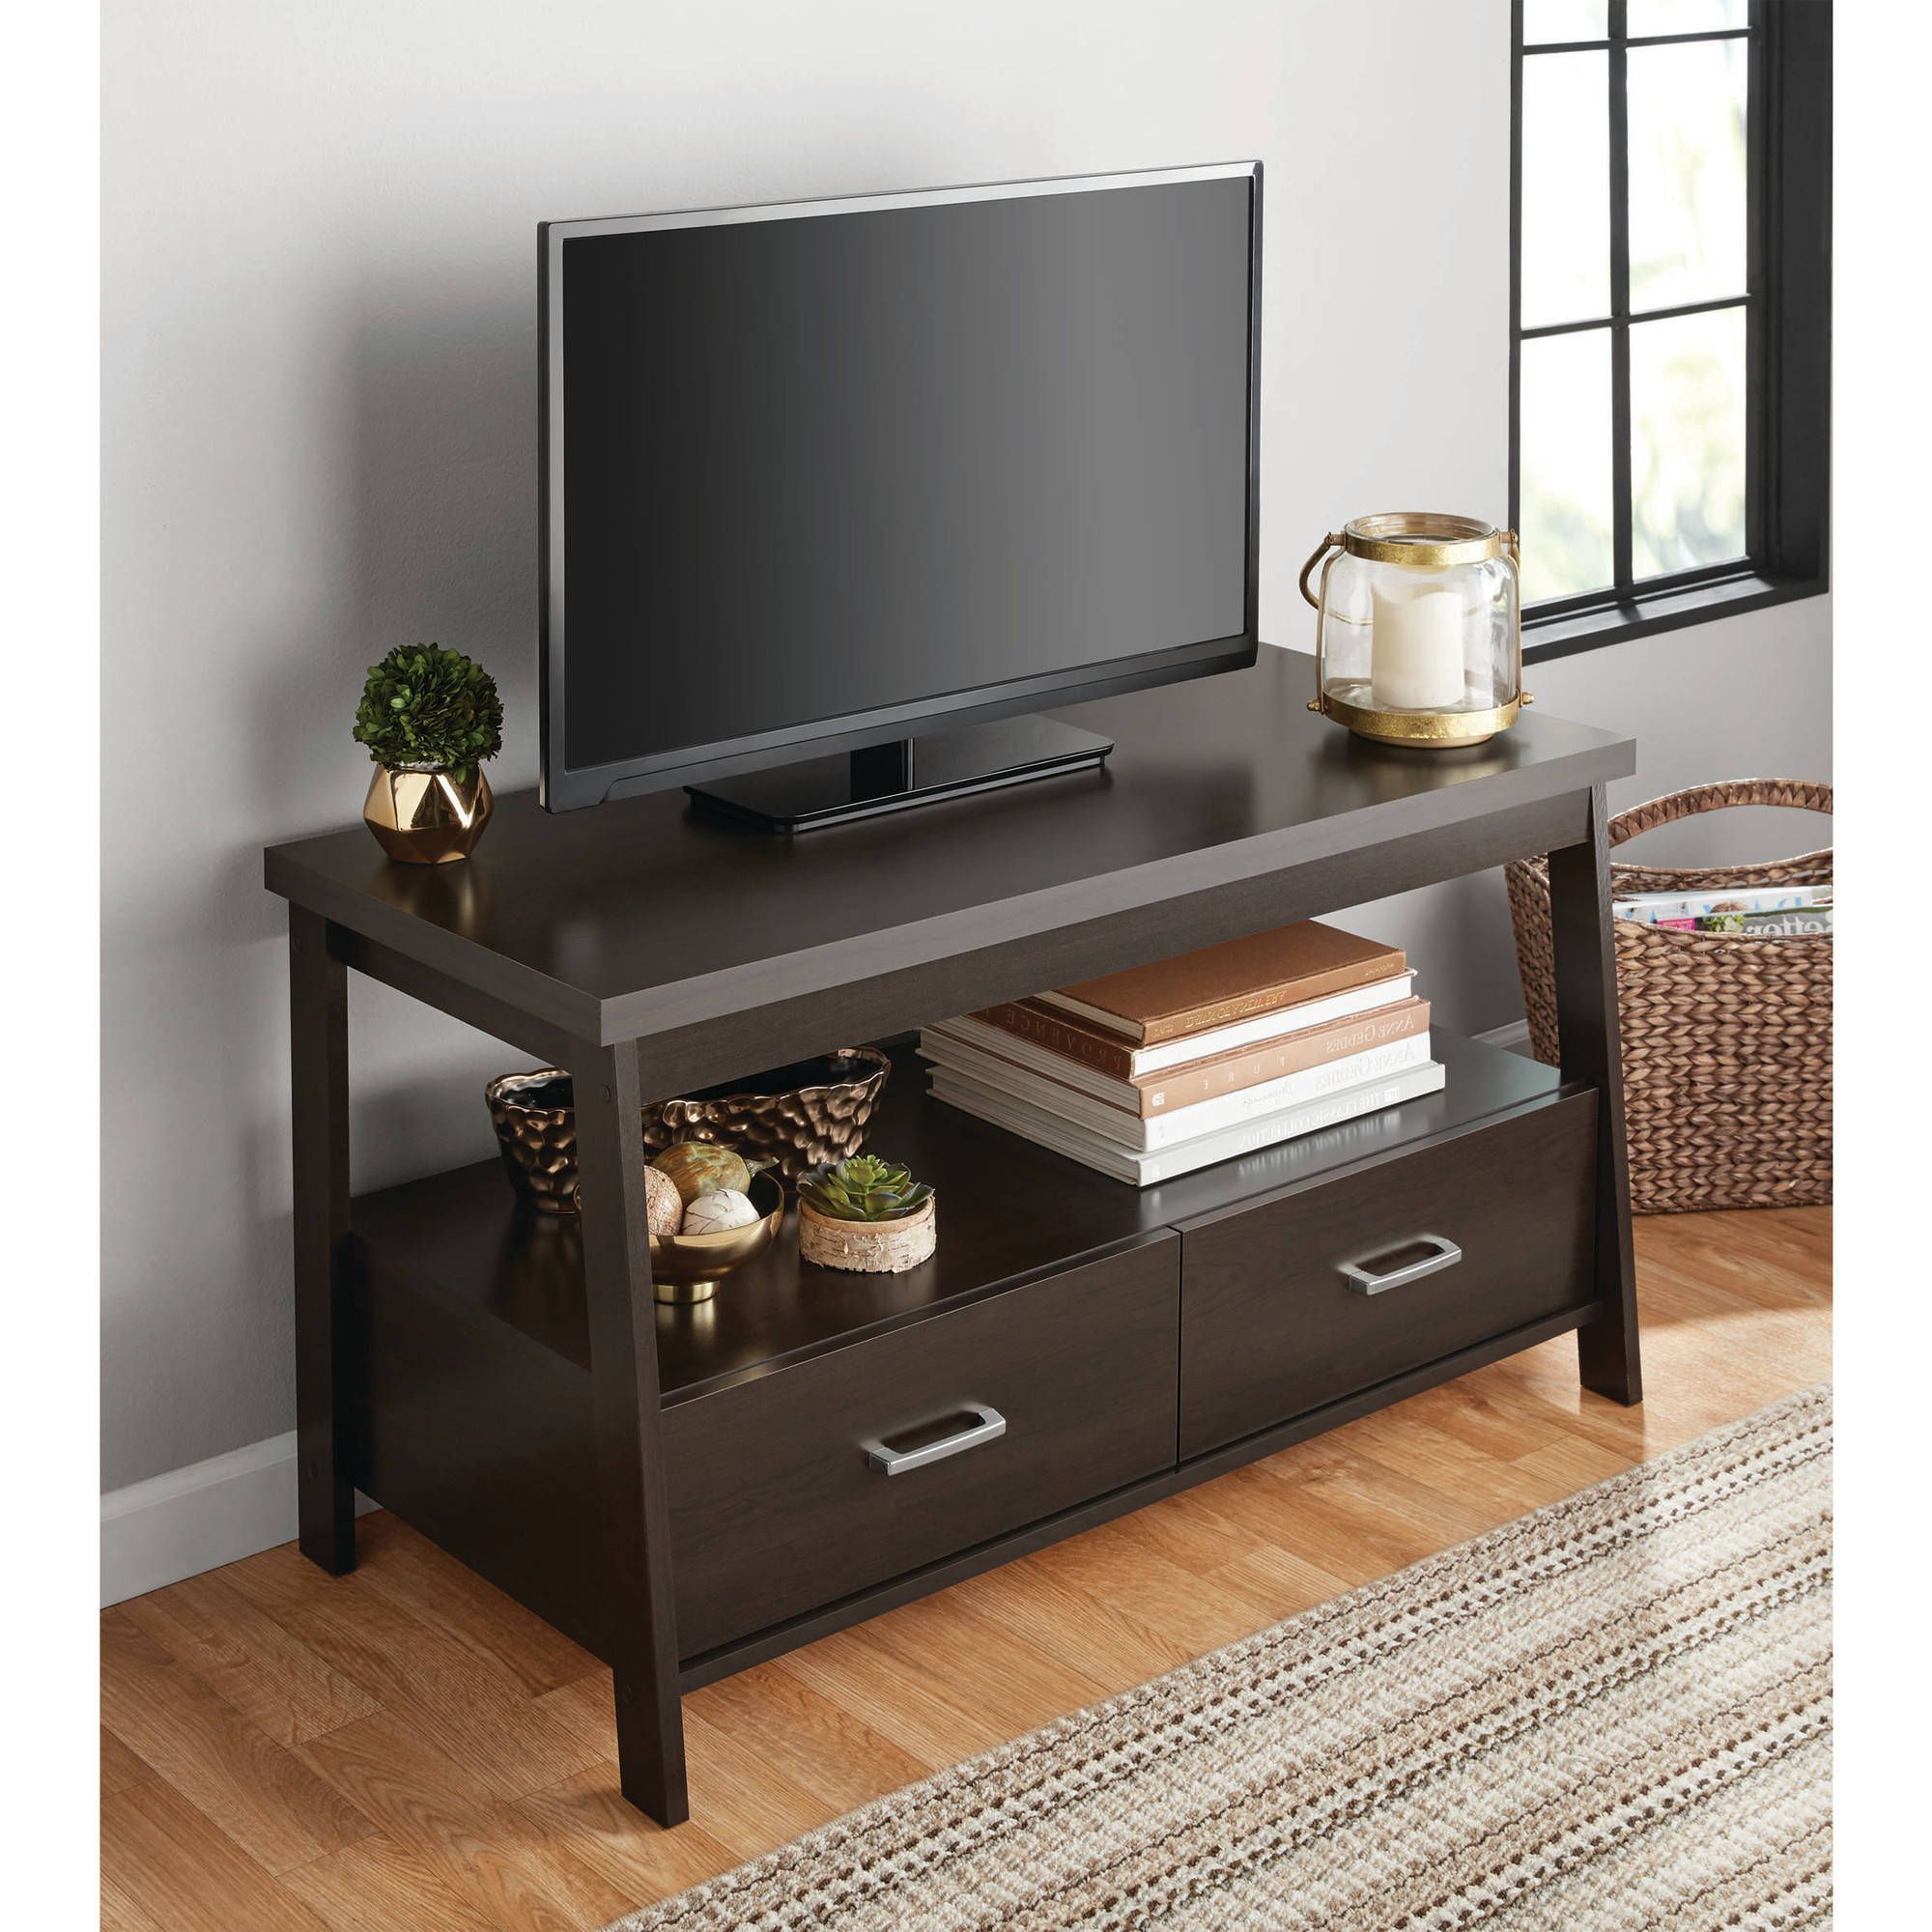 Mainstays Logan Tv Stand For Tvs Up To 47", Espresso Within Alden Design Wooden Tv Stands With Storage Cabinet Espresso (View 3 of 20)